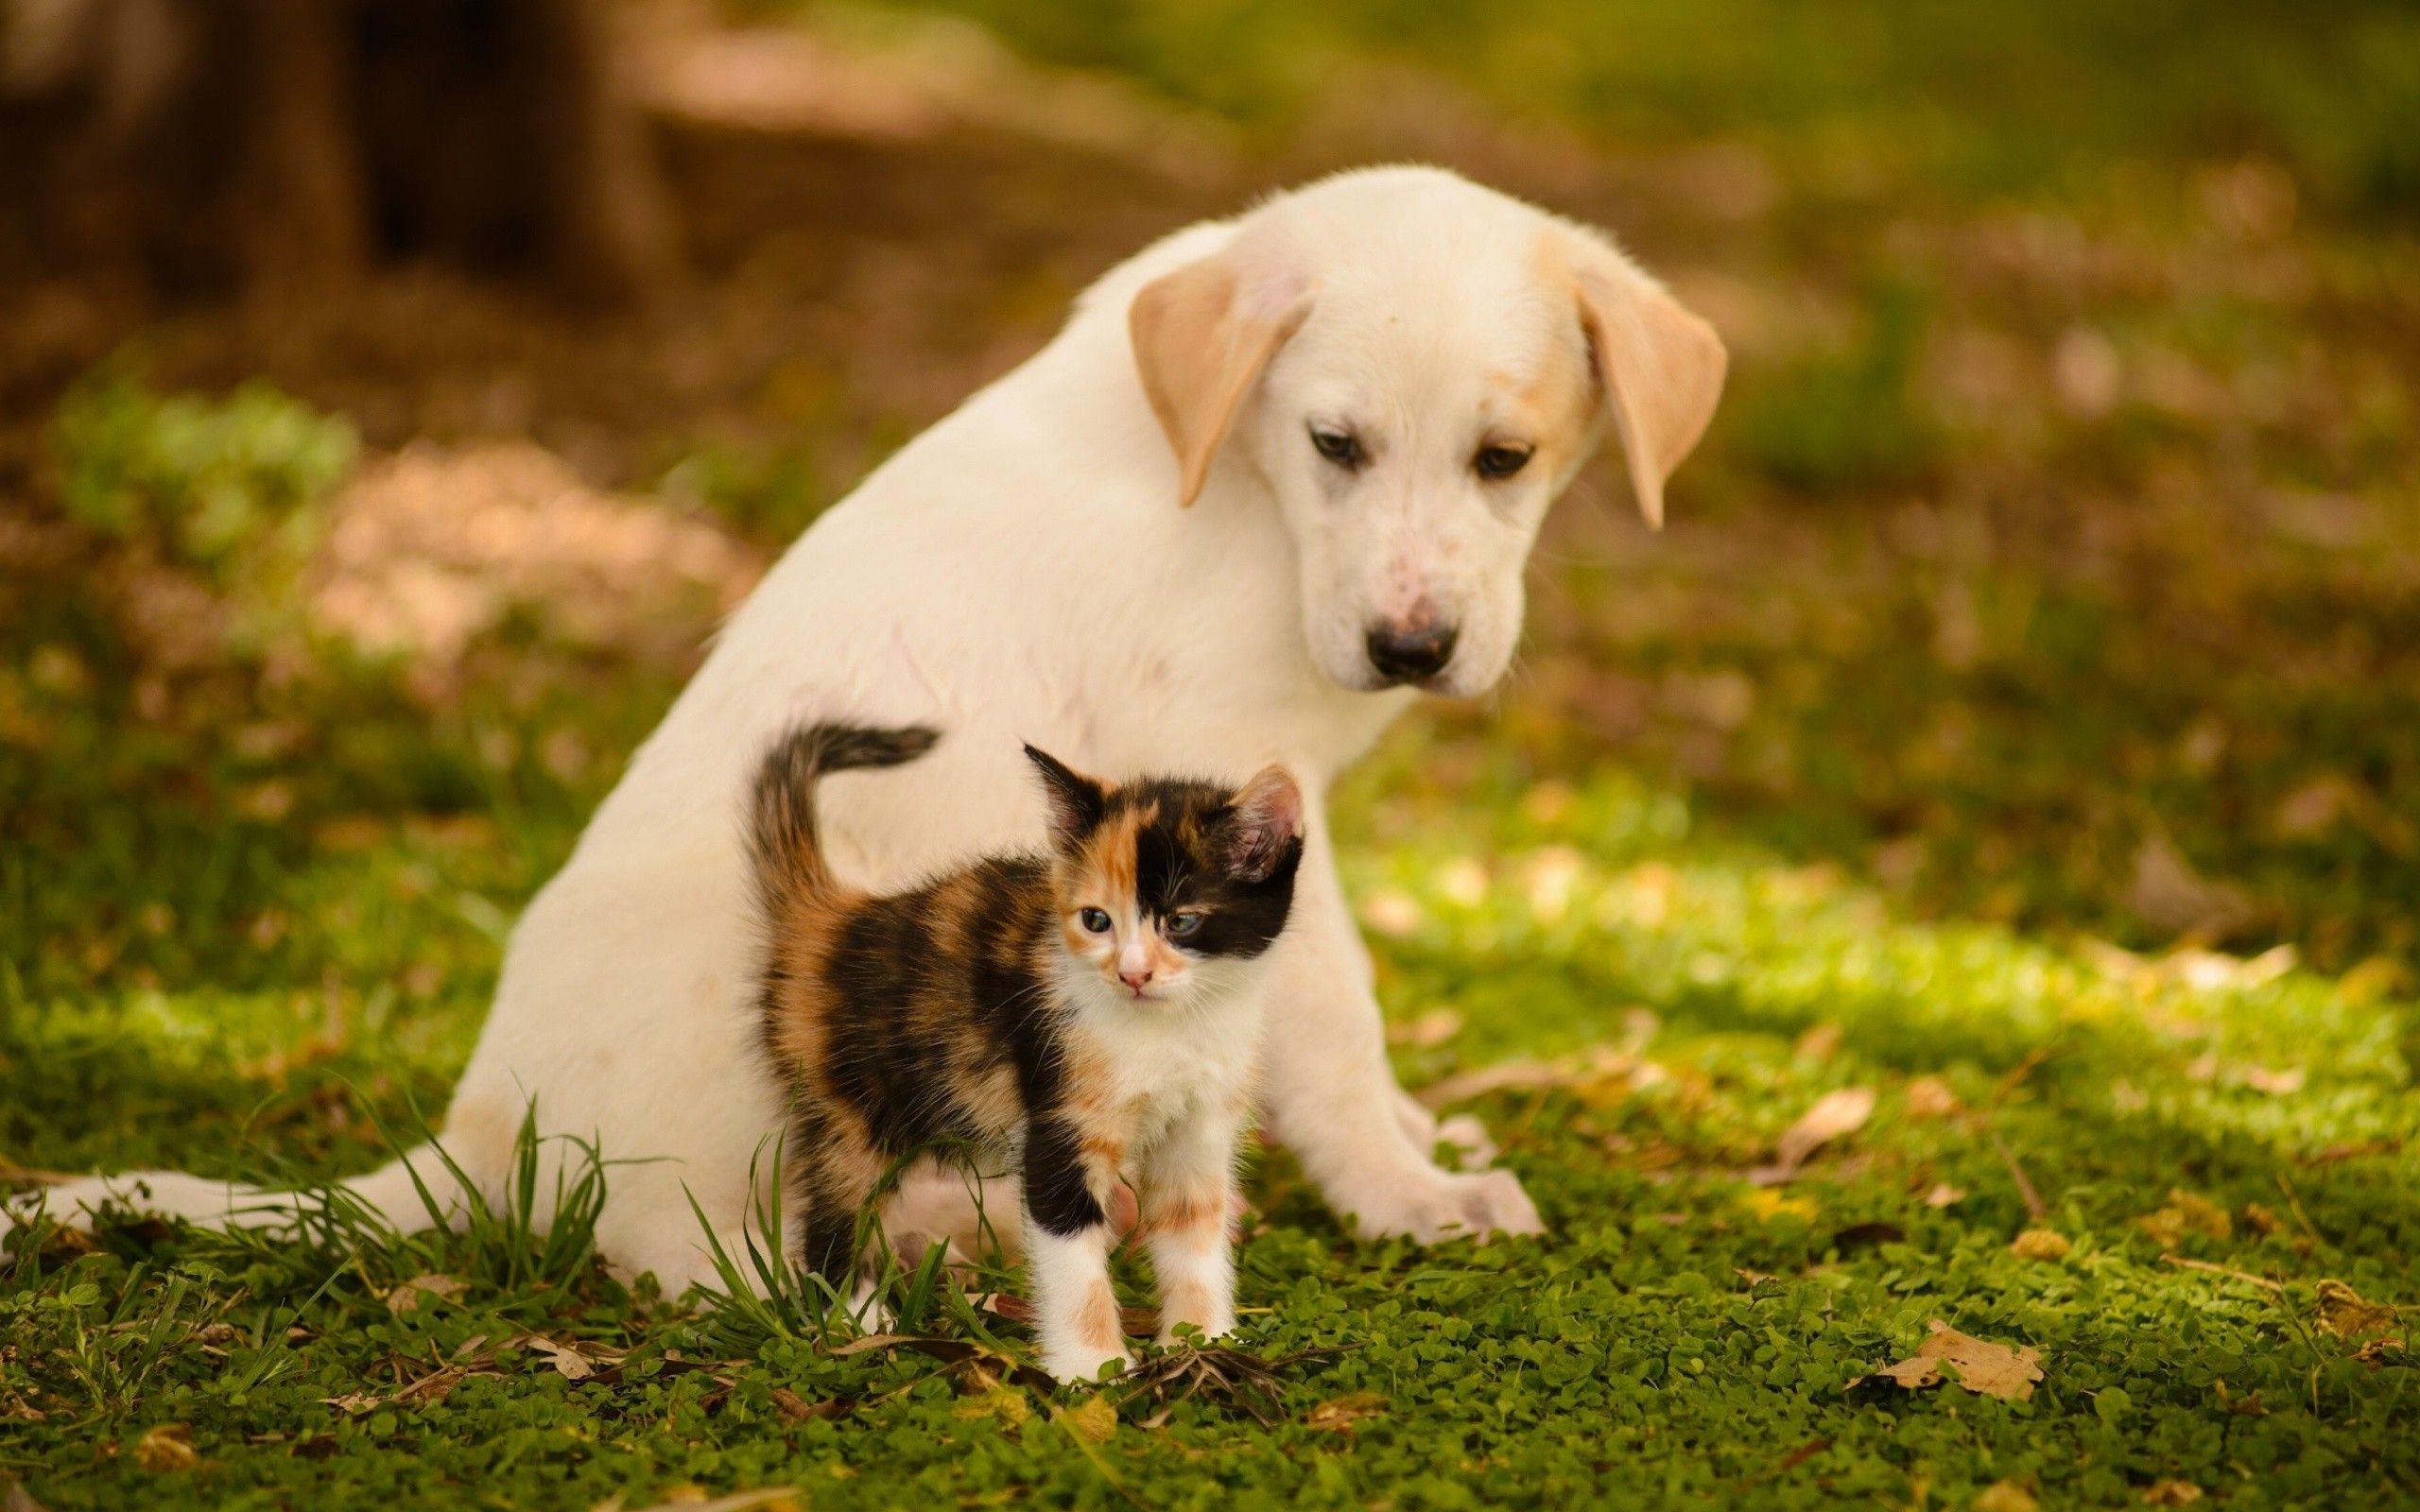 Kitten and Puppy Wallpapers - Top Free Kitten and Puppy Backgrounds